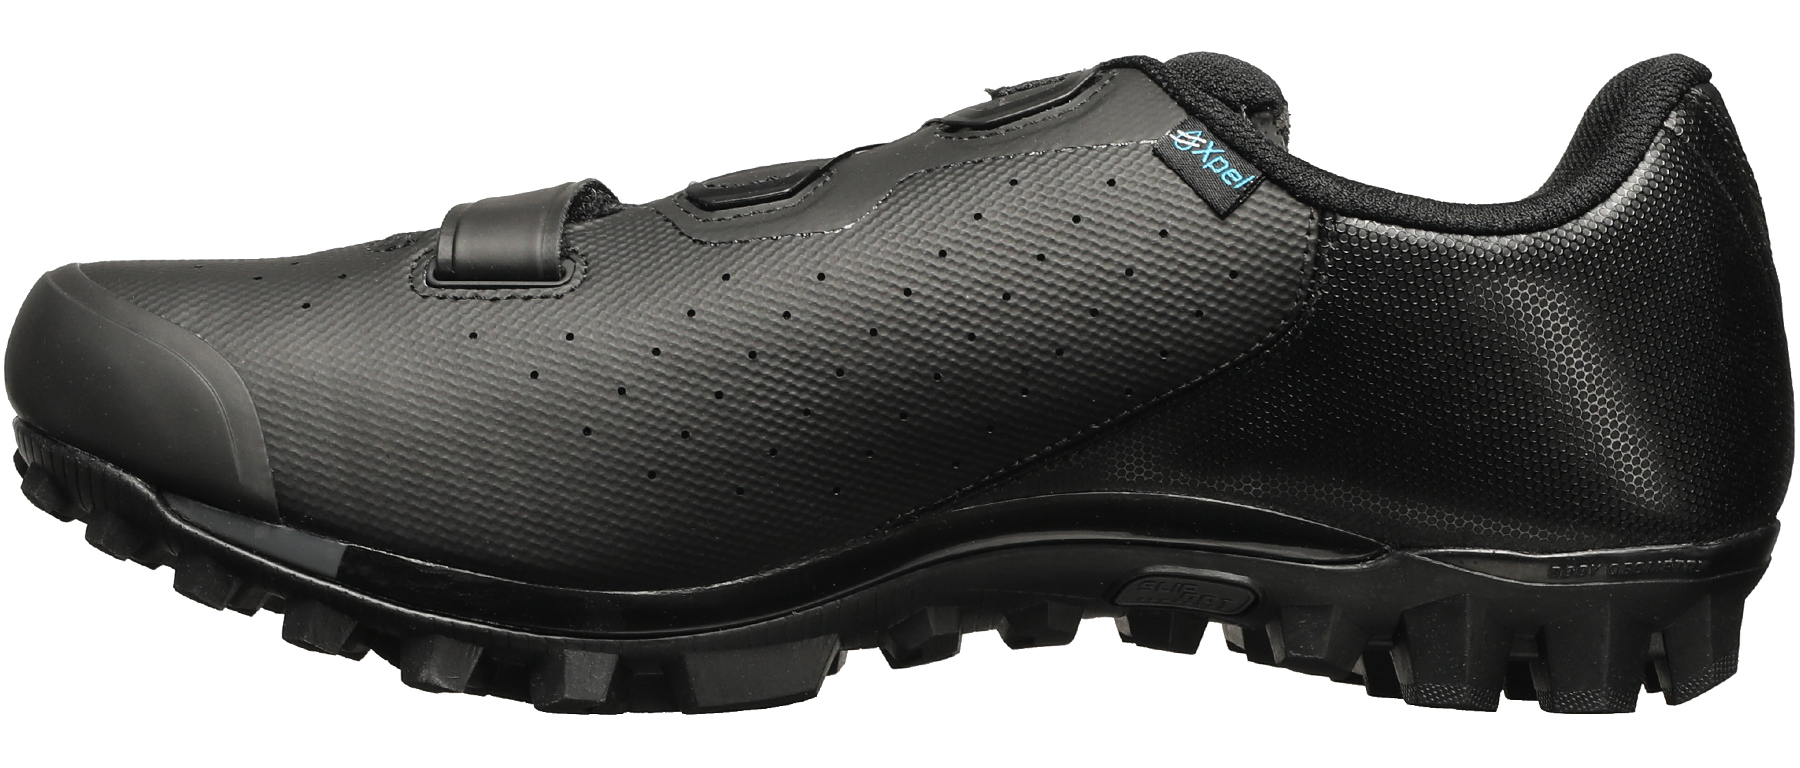 Specialized Recon 2.0 Wide Mountain Shoe